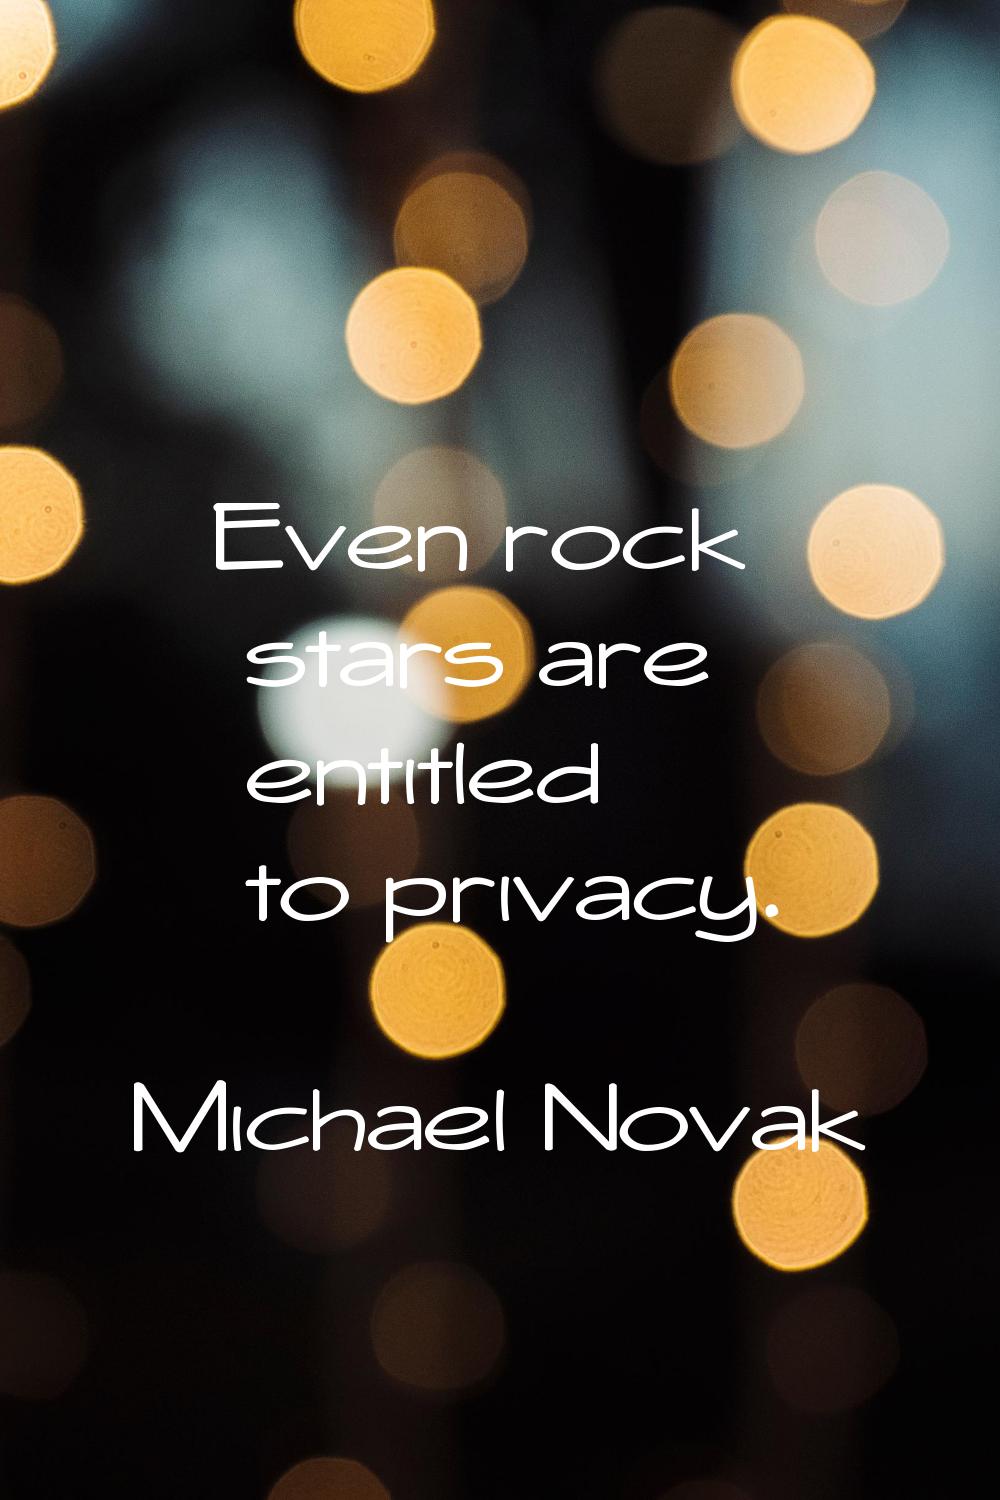 Even rock stars are entitled to privacy.